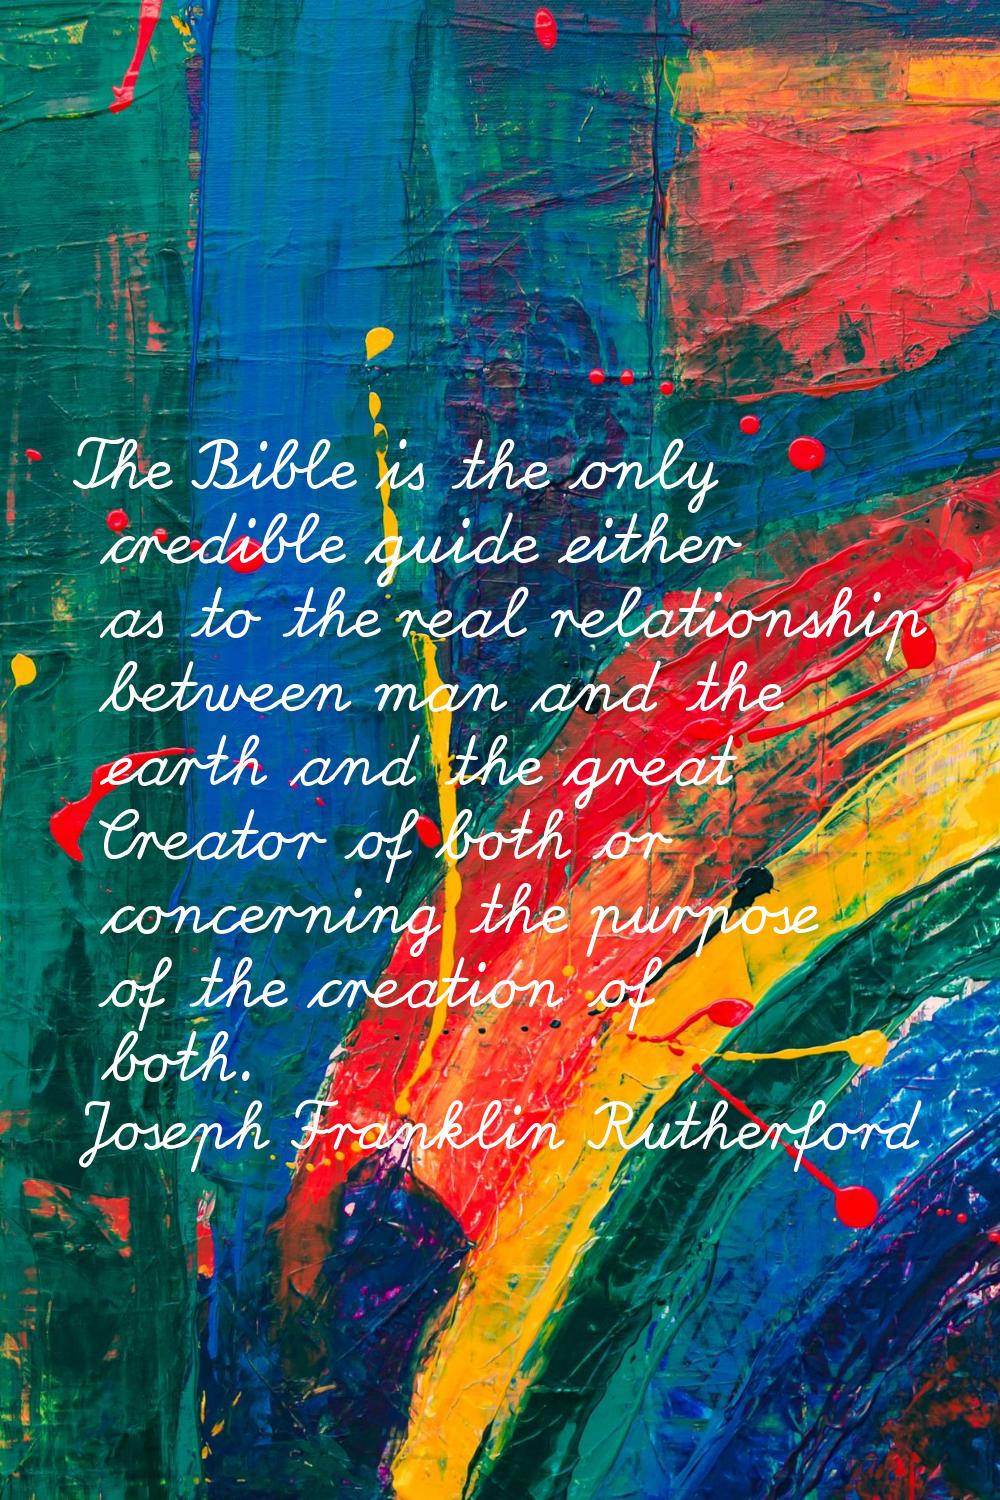 The Bible is the only credible guide either as to the real relationship between man and the earth a